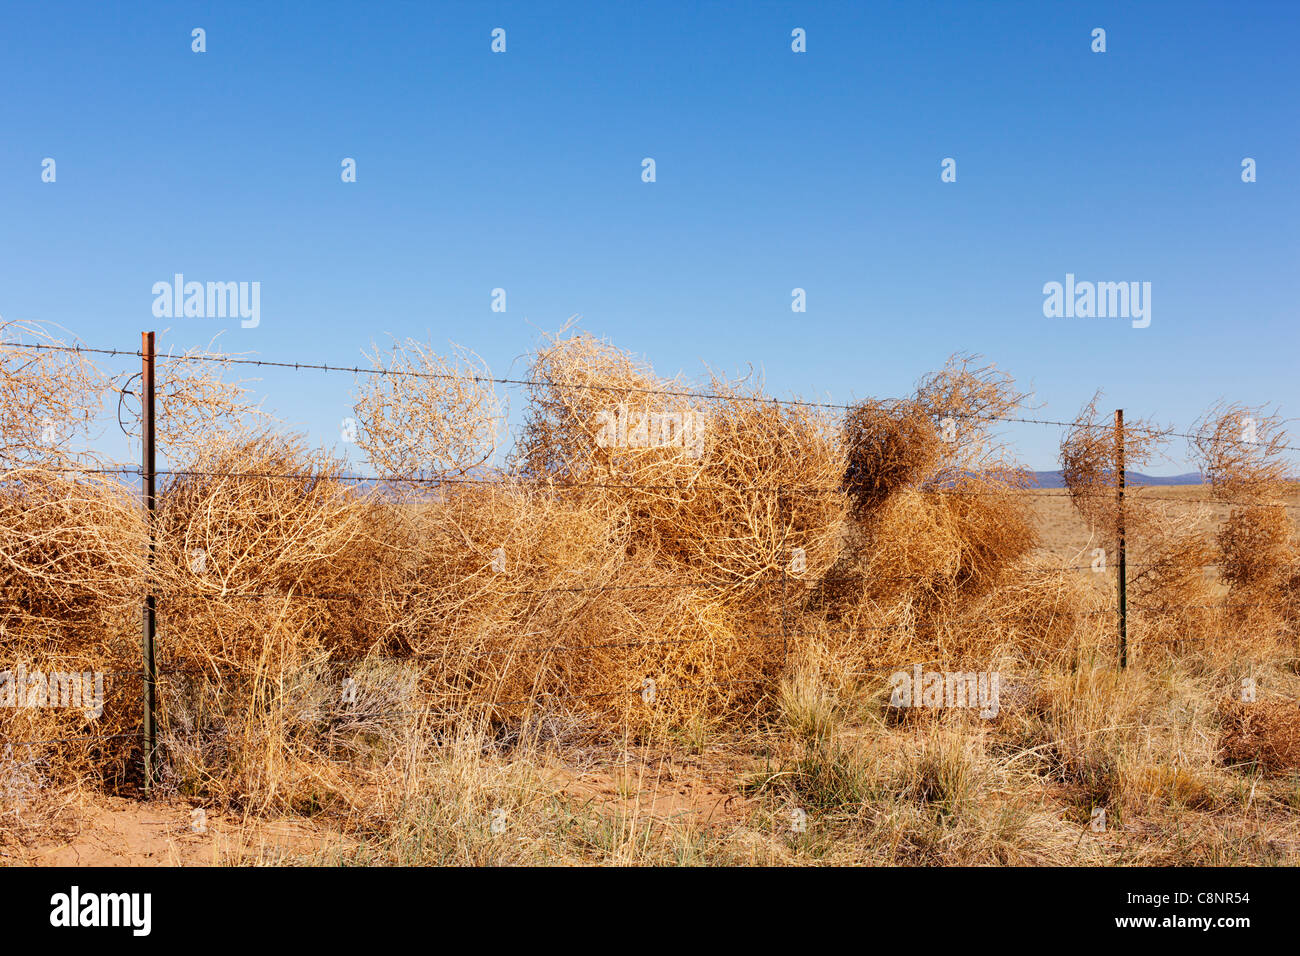 Tumbleweeds caught in a barbed wire fence, rural New Mexico. Stock Photo